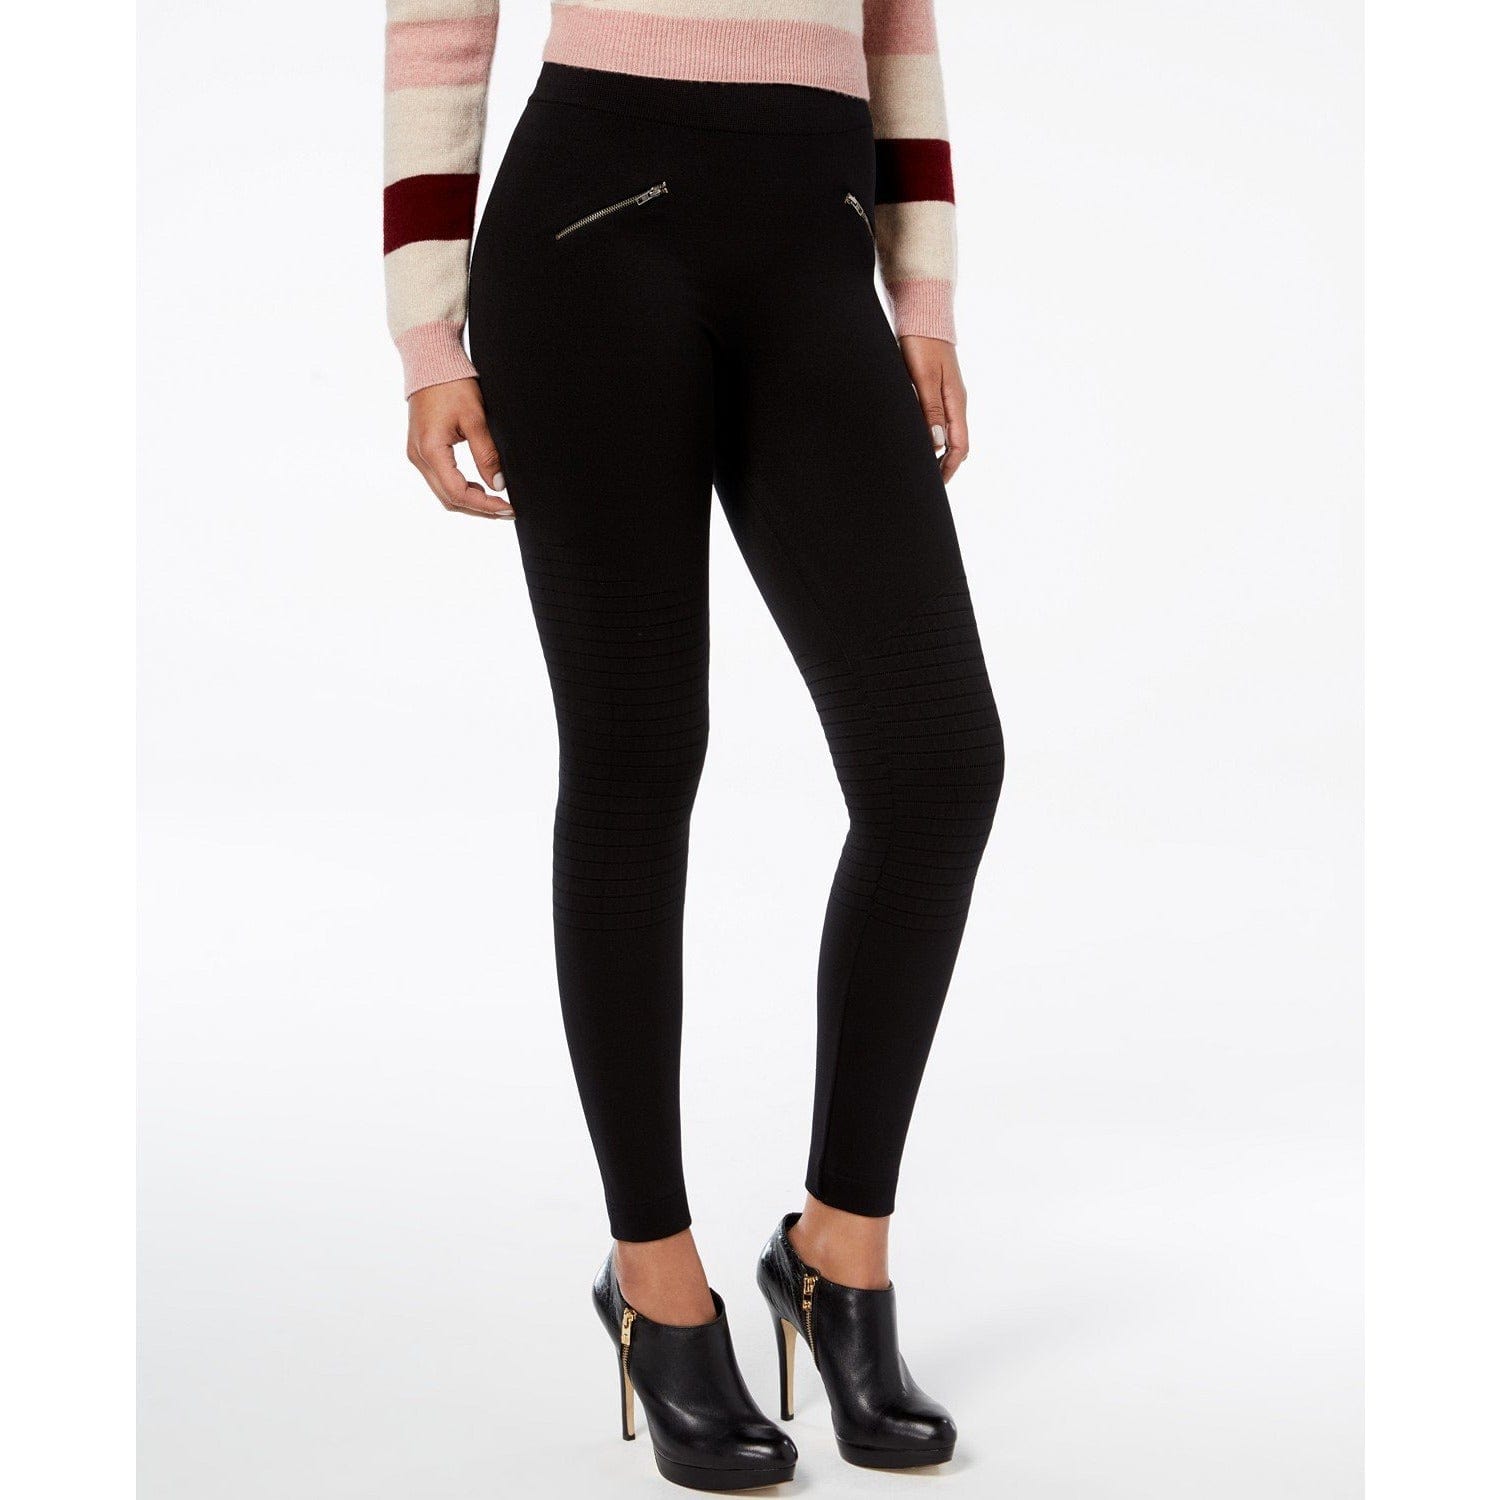 Hue Moto Brushed & Fleece Lined Seamless Leggings - The Pink Pigs, A Compassionate Boutique